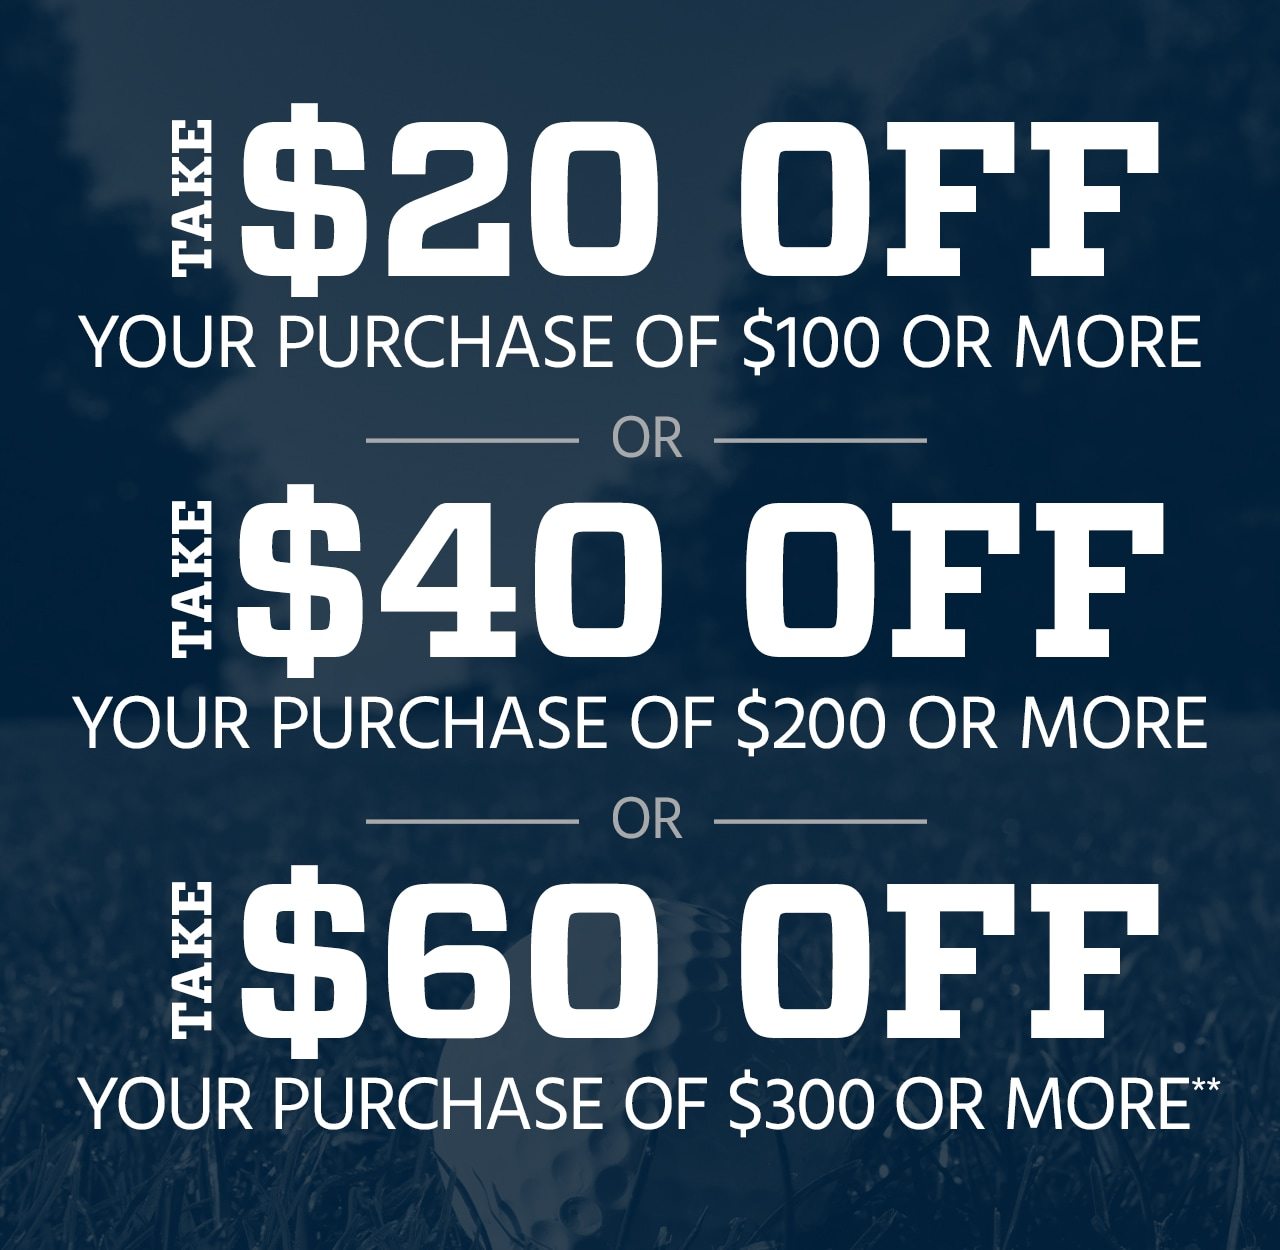 Take $20 off Your Purchase of $100 or More OR Take $40 off Your Purchase of $200 or More OR Take $60 off Your Purchase of $300 or More**